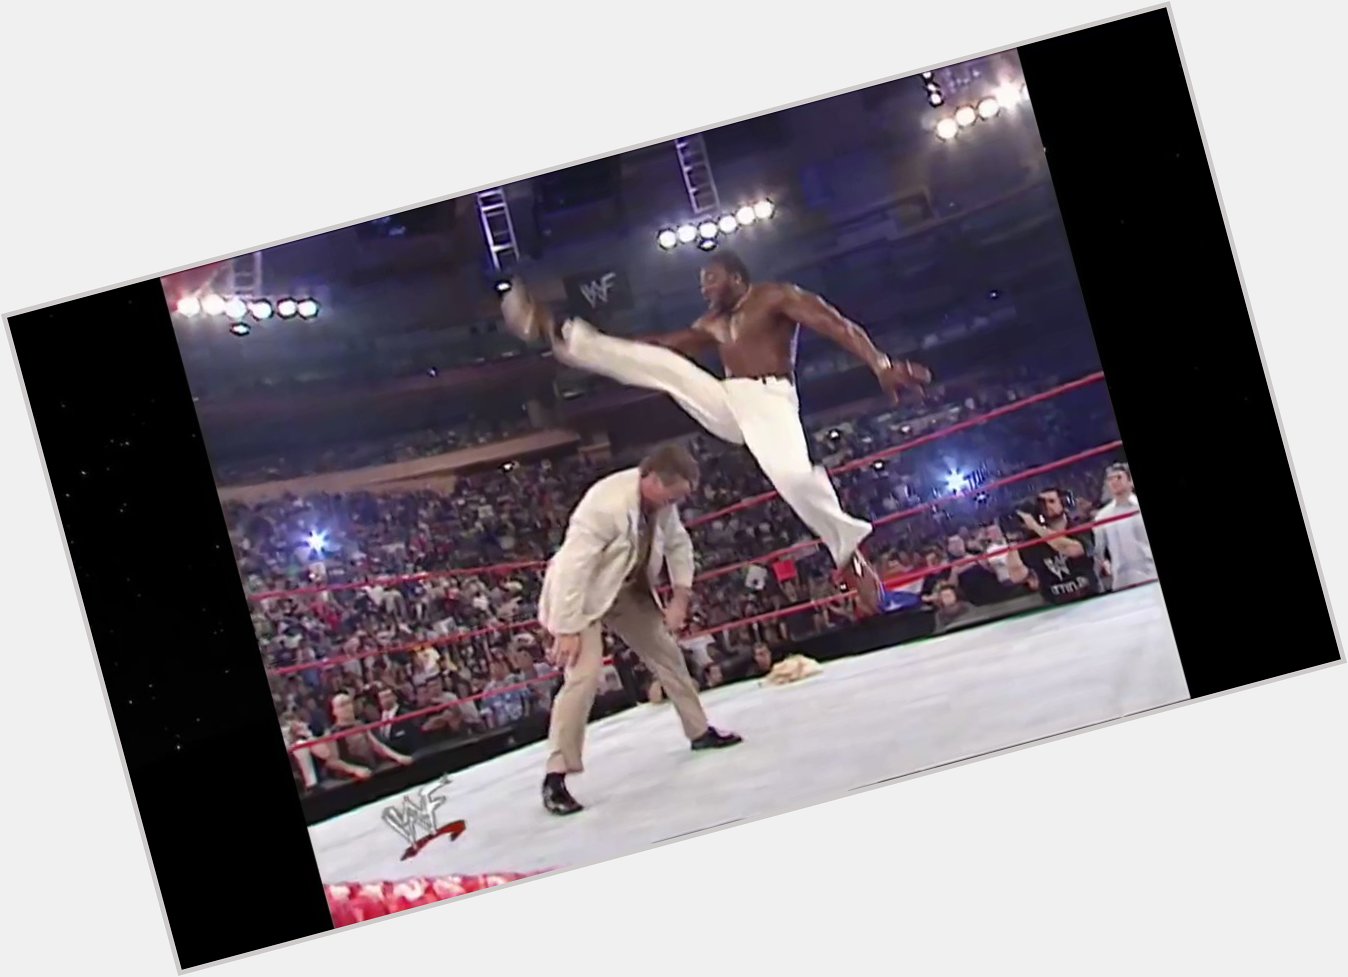 Happy Birthday Booker T. Here is one of the few great moments of the WCW Invasion of WWE. 